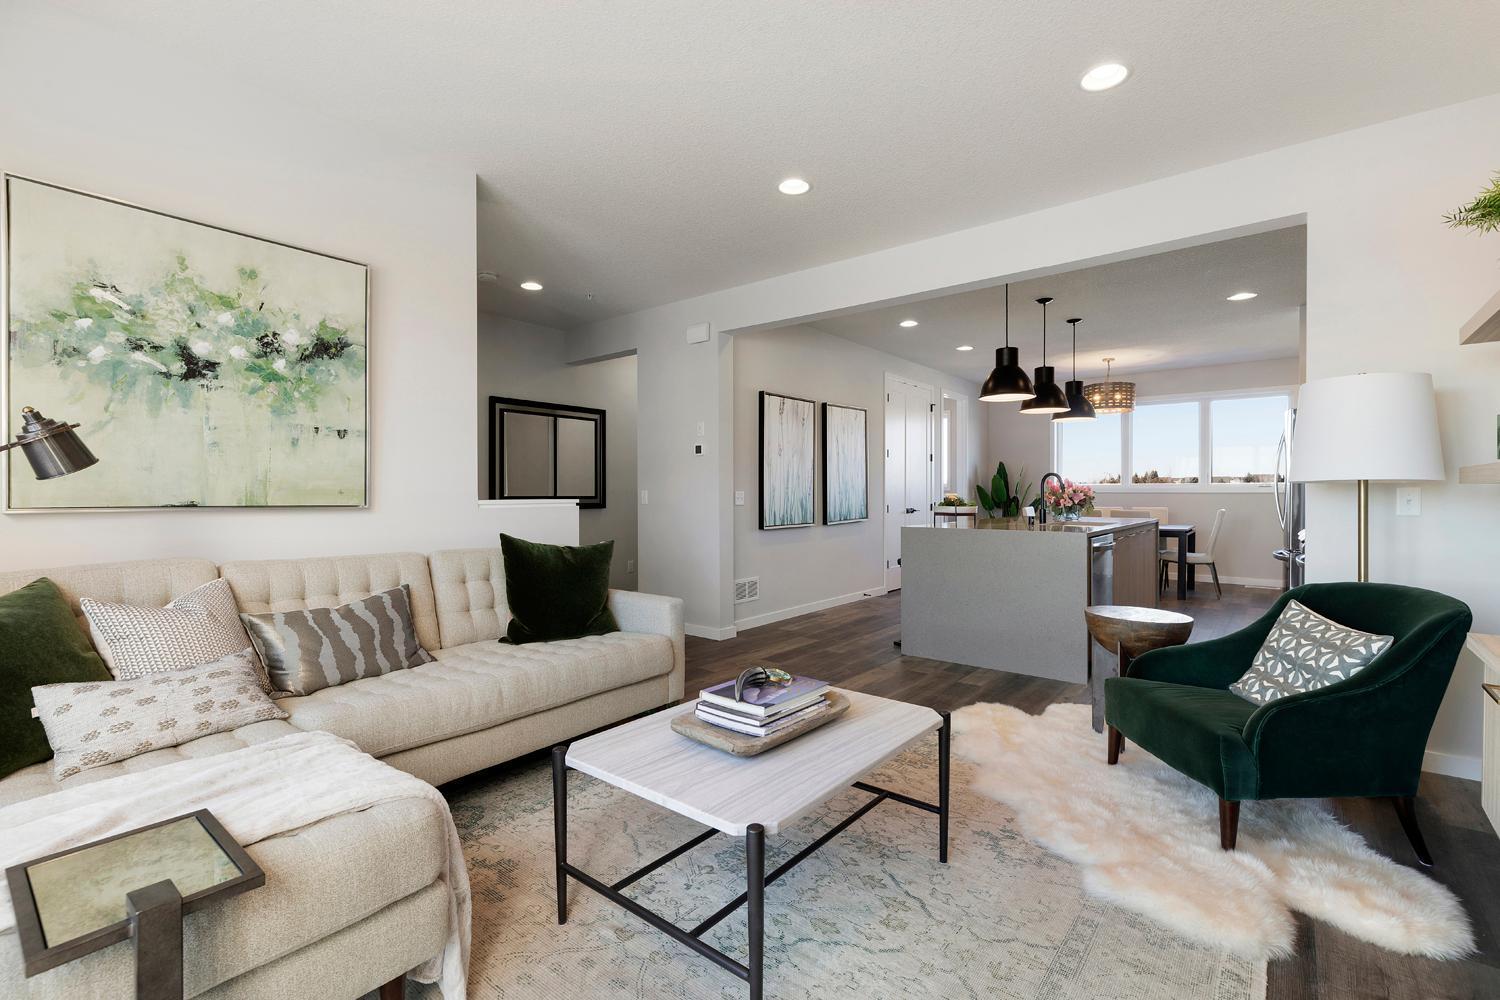 It's just so cozy and perfect! Family room which flows into kitchen makes it so easy for entertaining. Photos are of model home; features and options may vary.